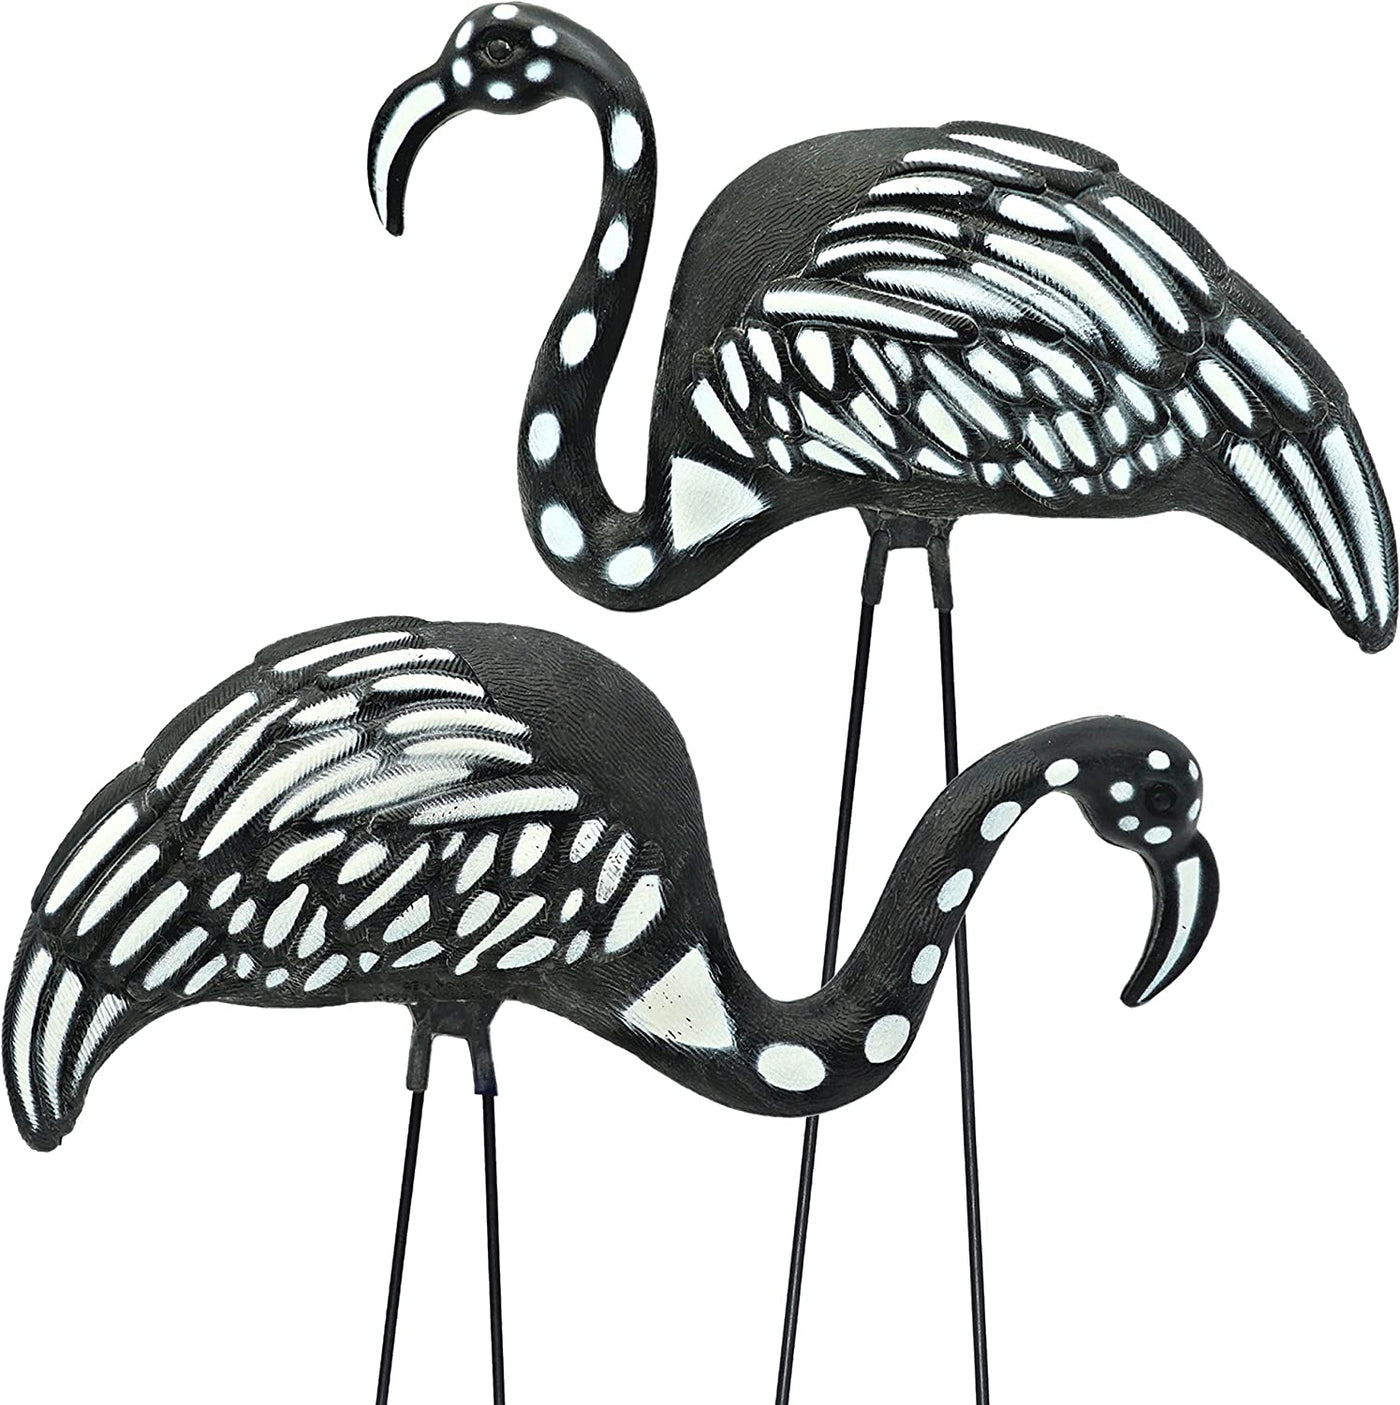 Skeleton Flamingo Yard Ornaments (Set of 2) Large Zombie Flamingo Scary Lawn Decor for Fall Halloween Outdoor Decorations by 4E's Novelty